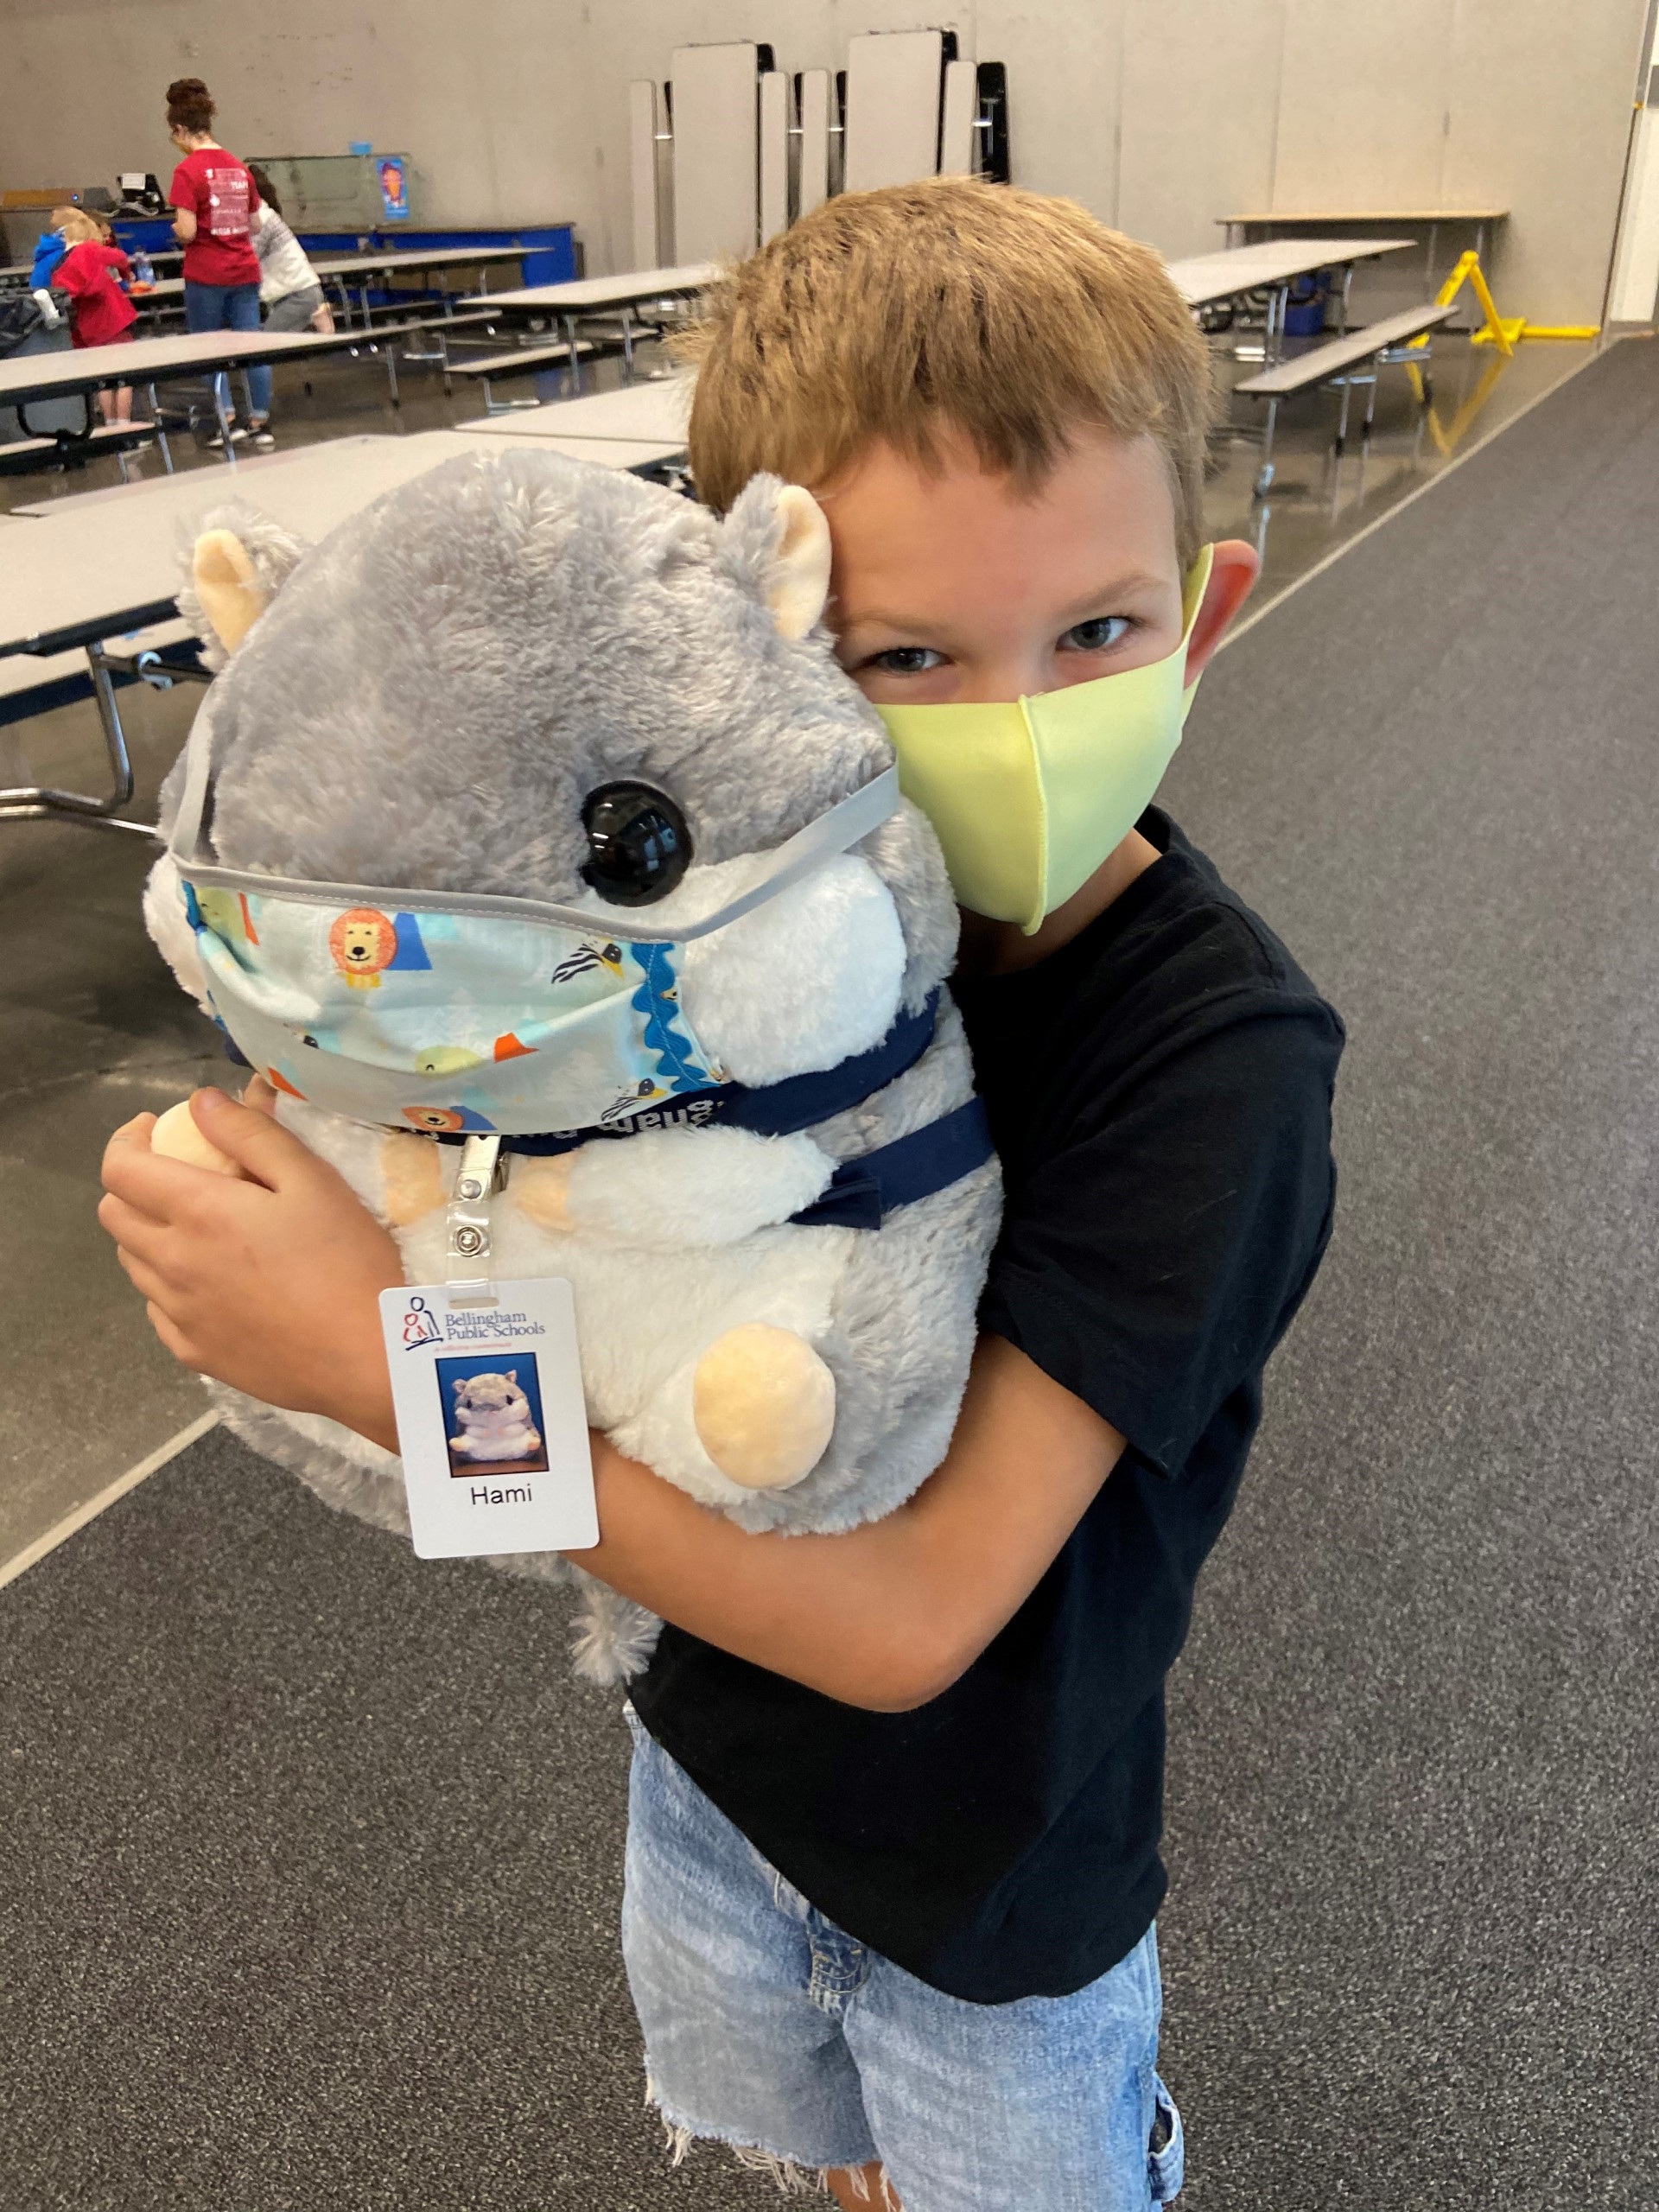 Mascot Hami helped kids feel safe and supported at the onset of the pandemic